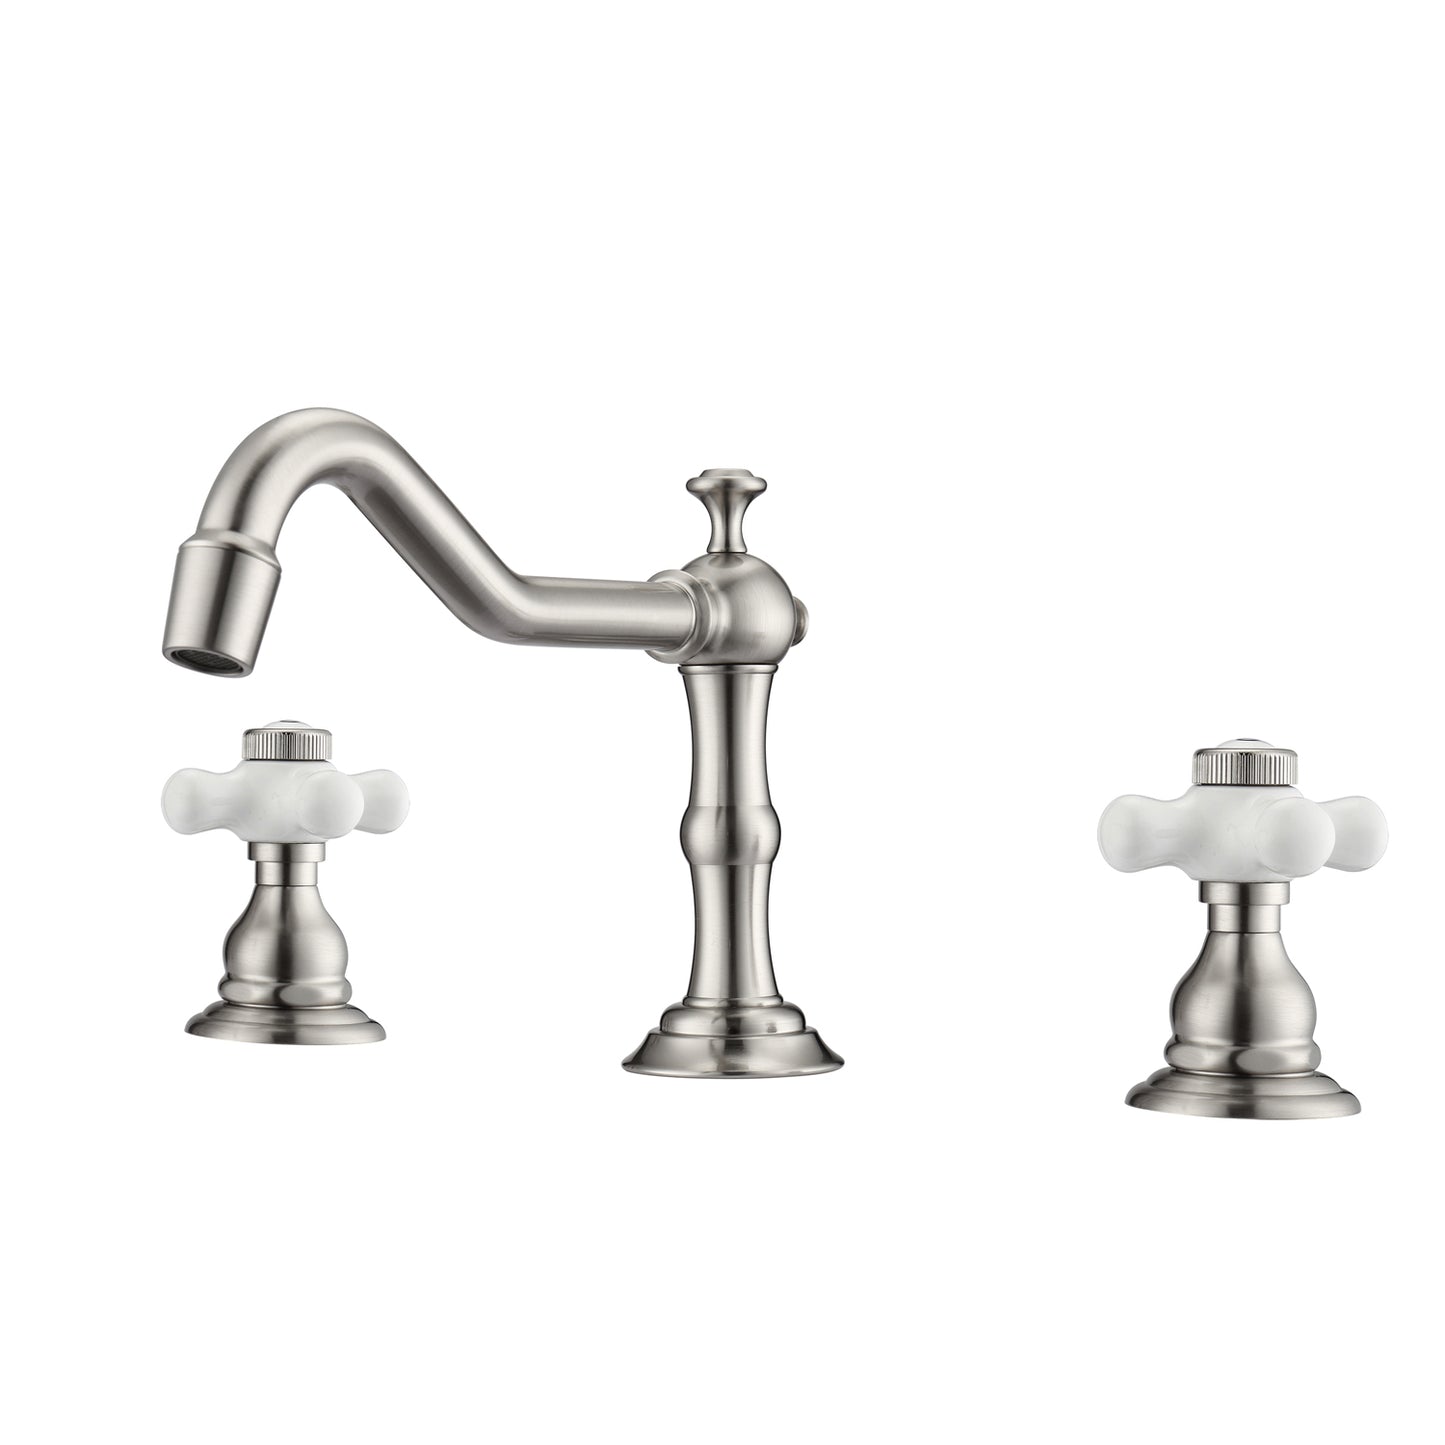 Roma 8" Widespread Brushed Nickel Bathroom Faucet with Porcelain Cross Handles